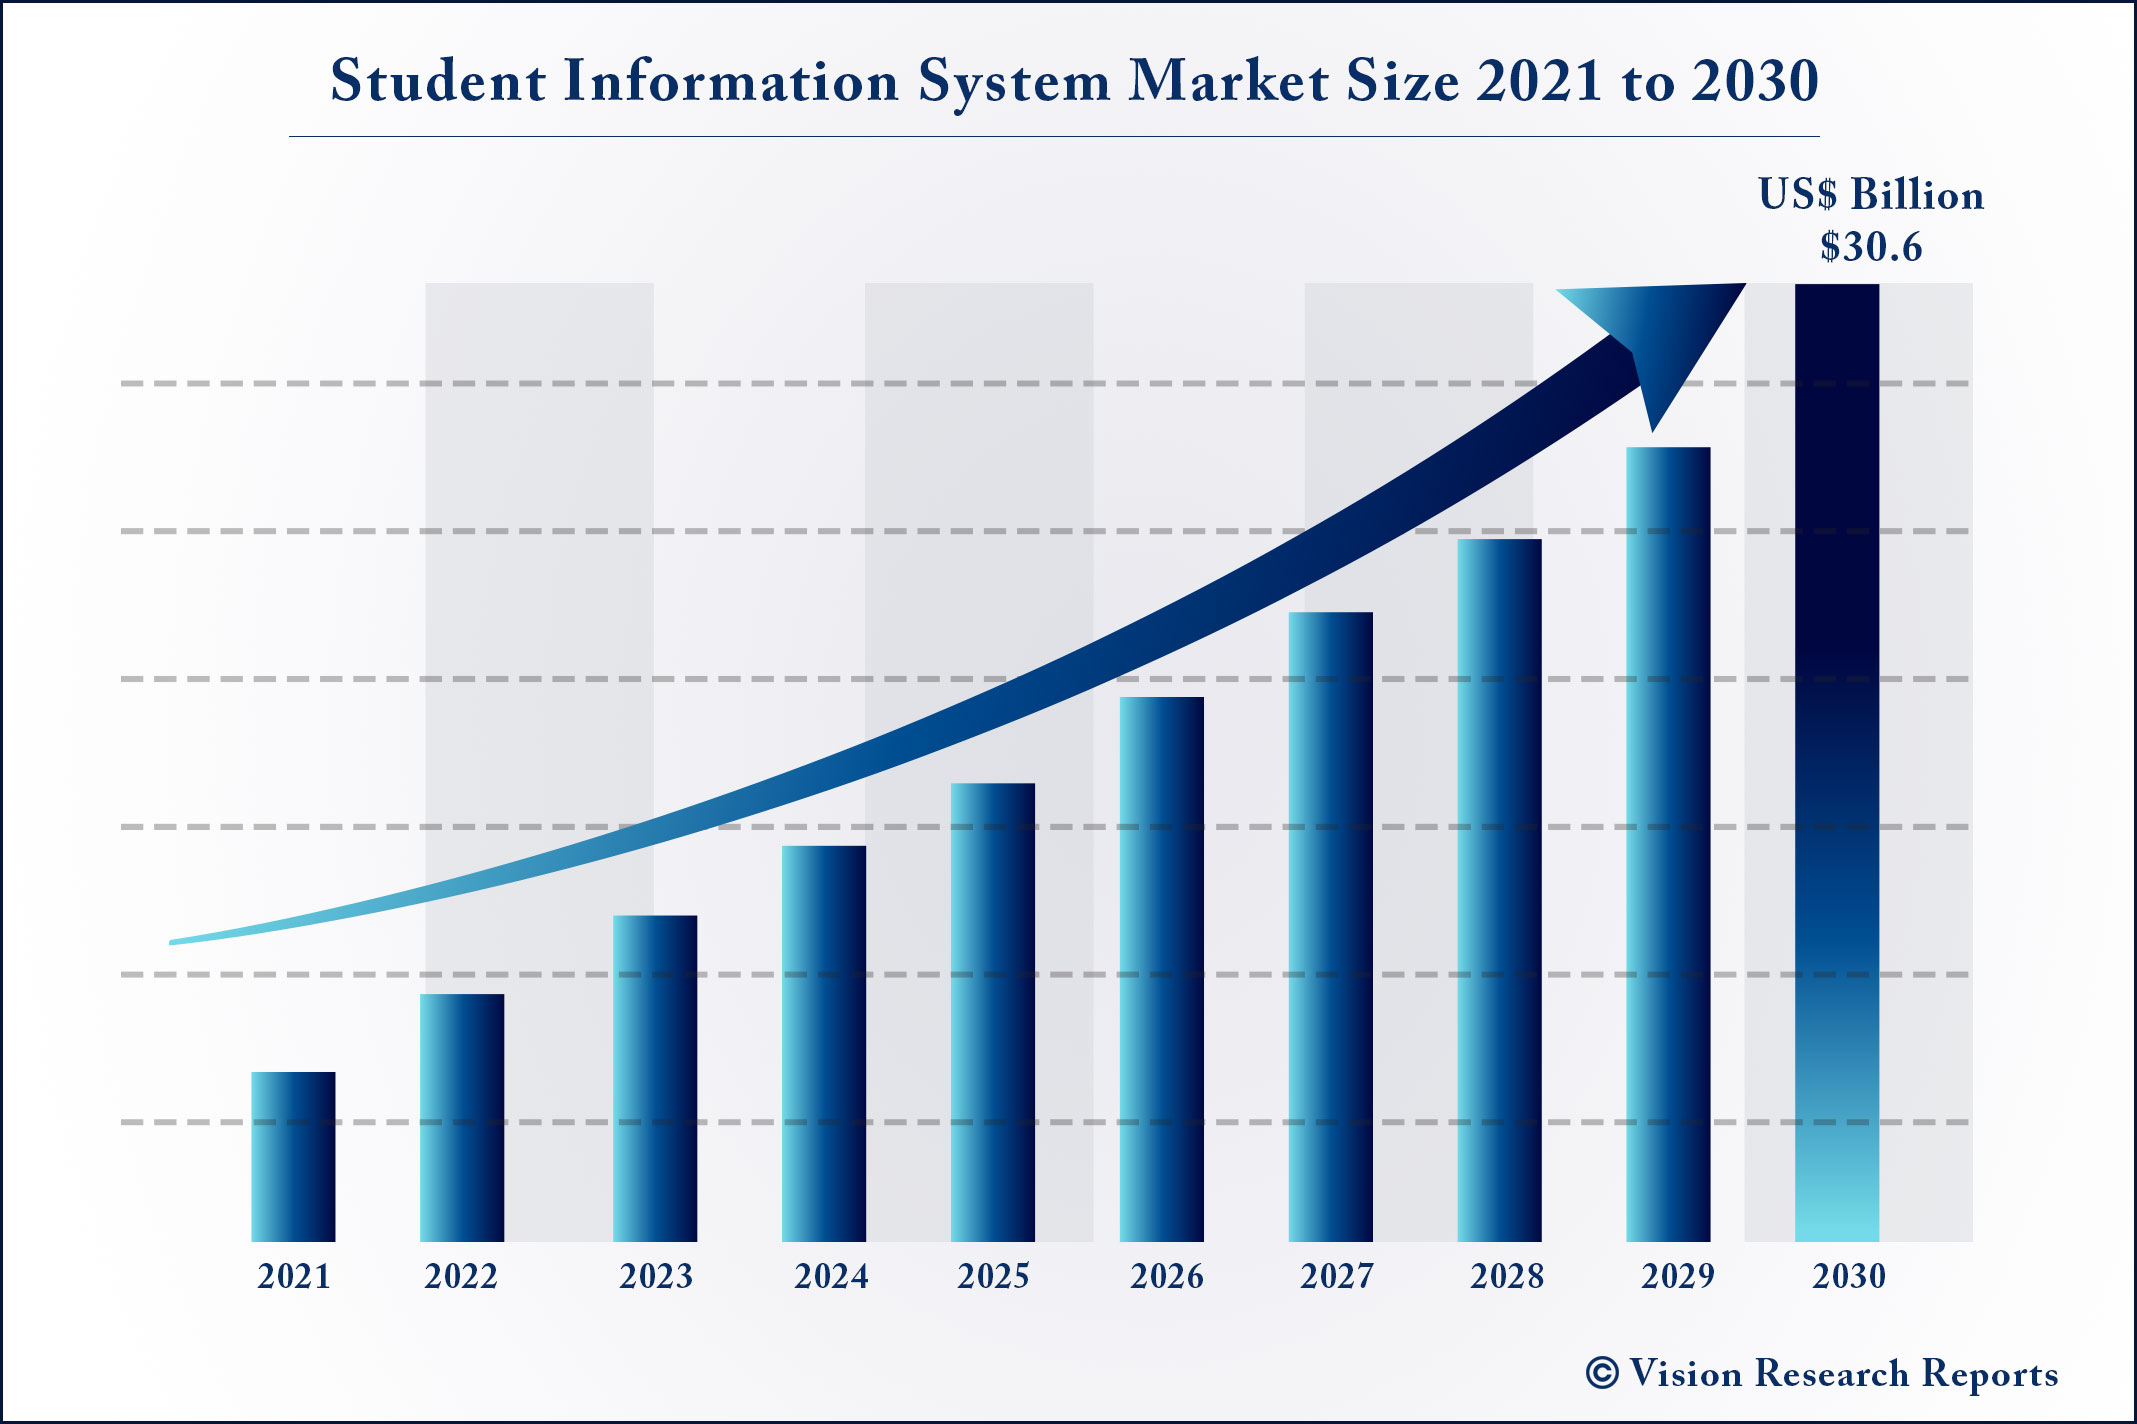 Student Information System Market Size 2021 to 2030